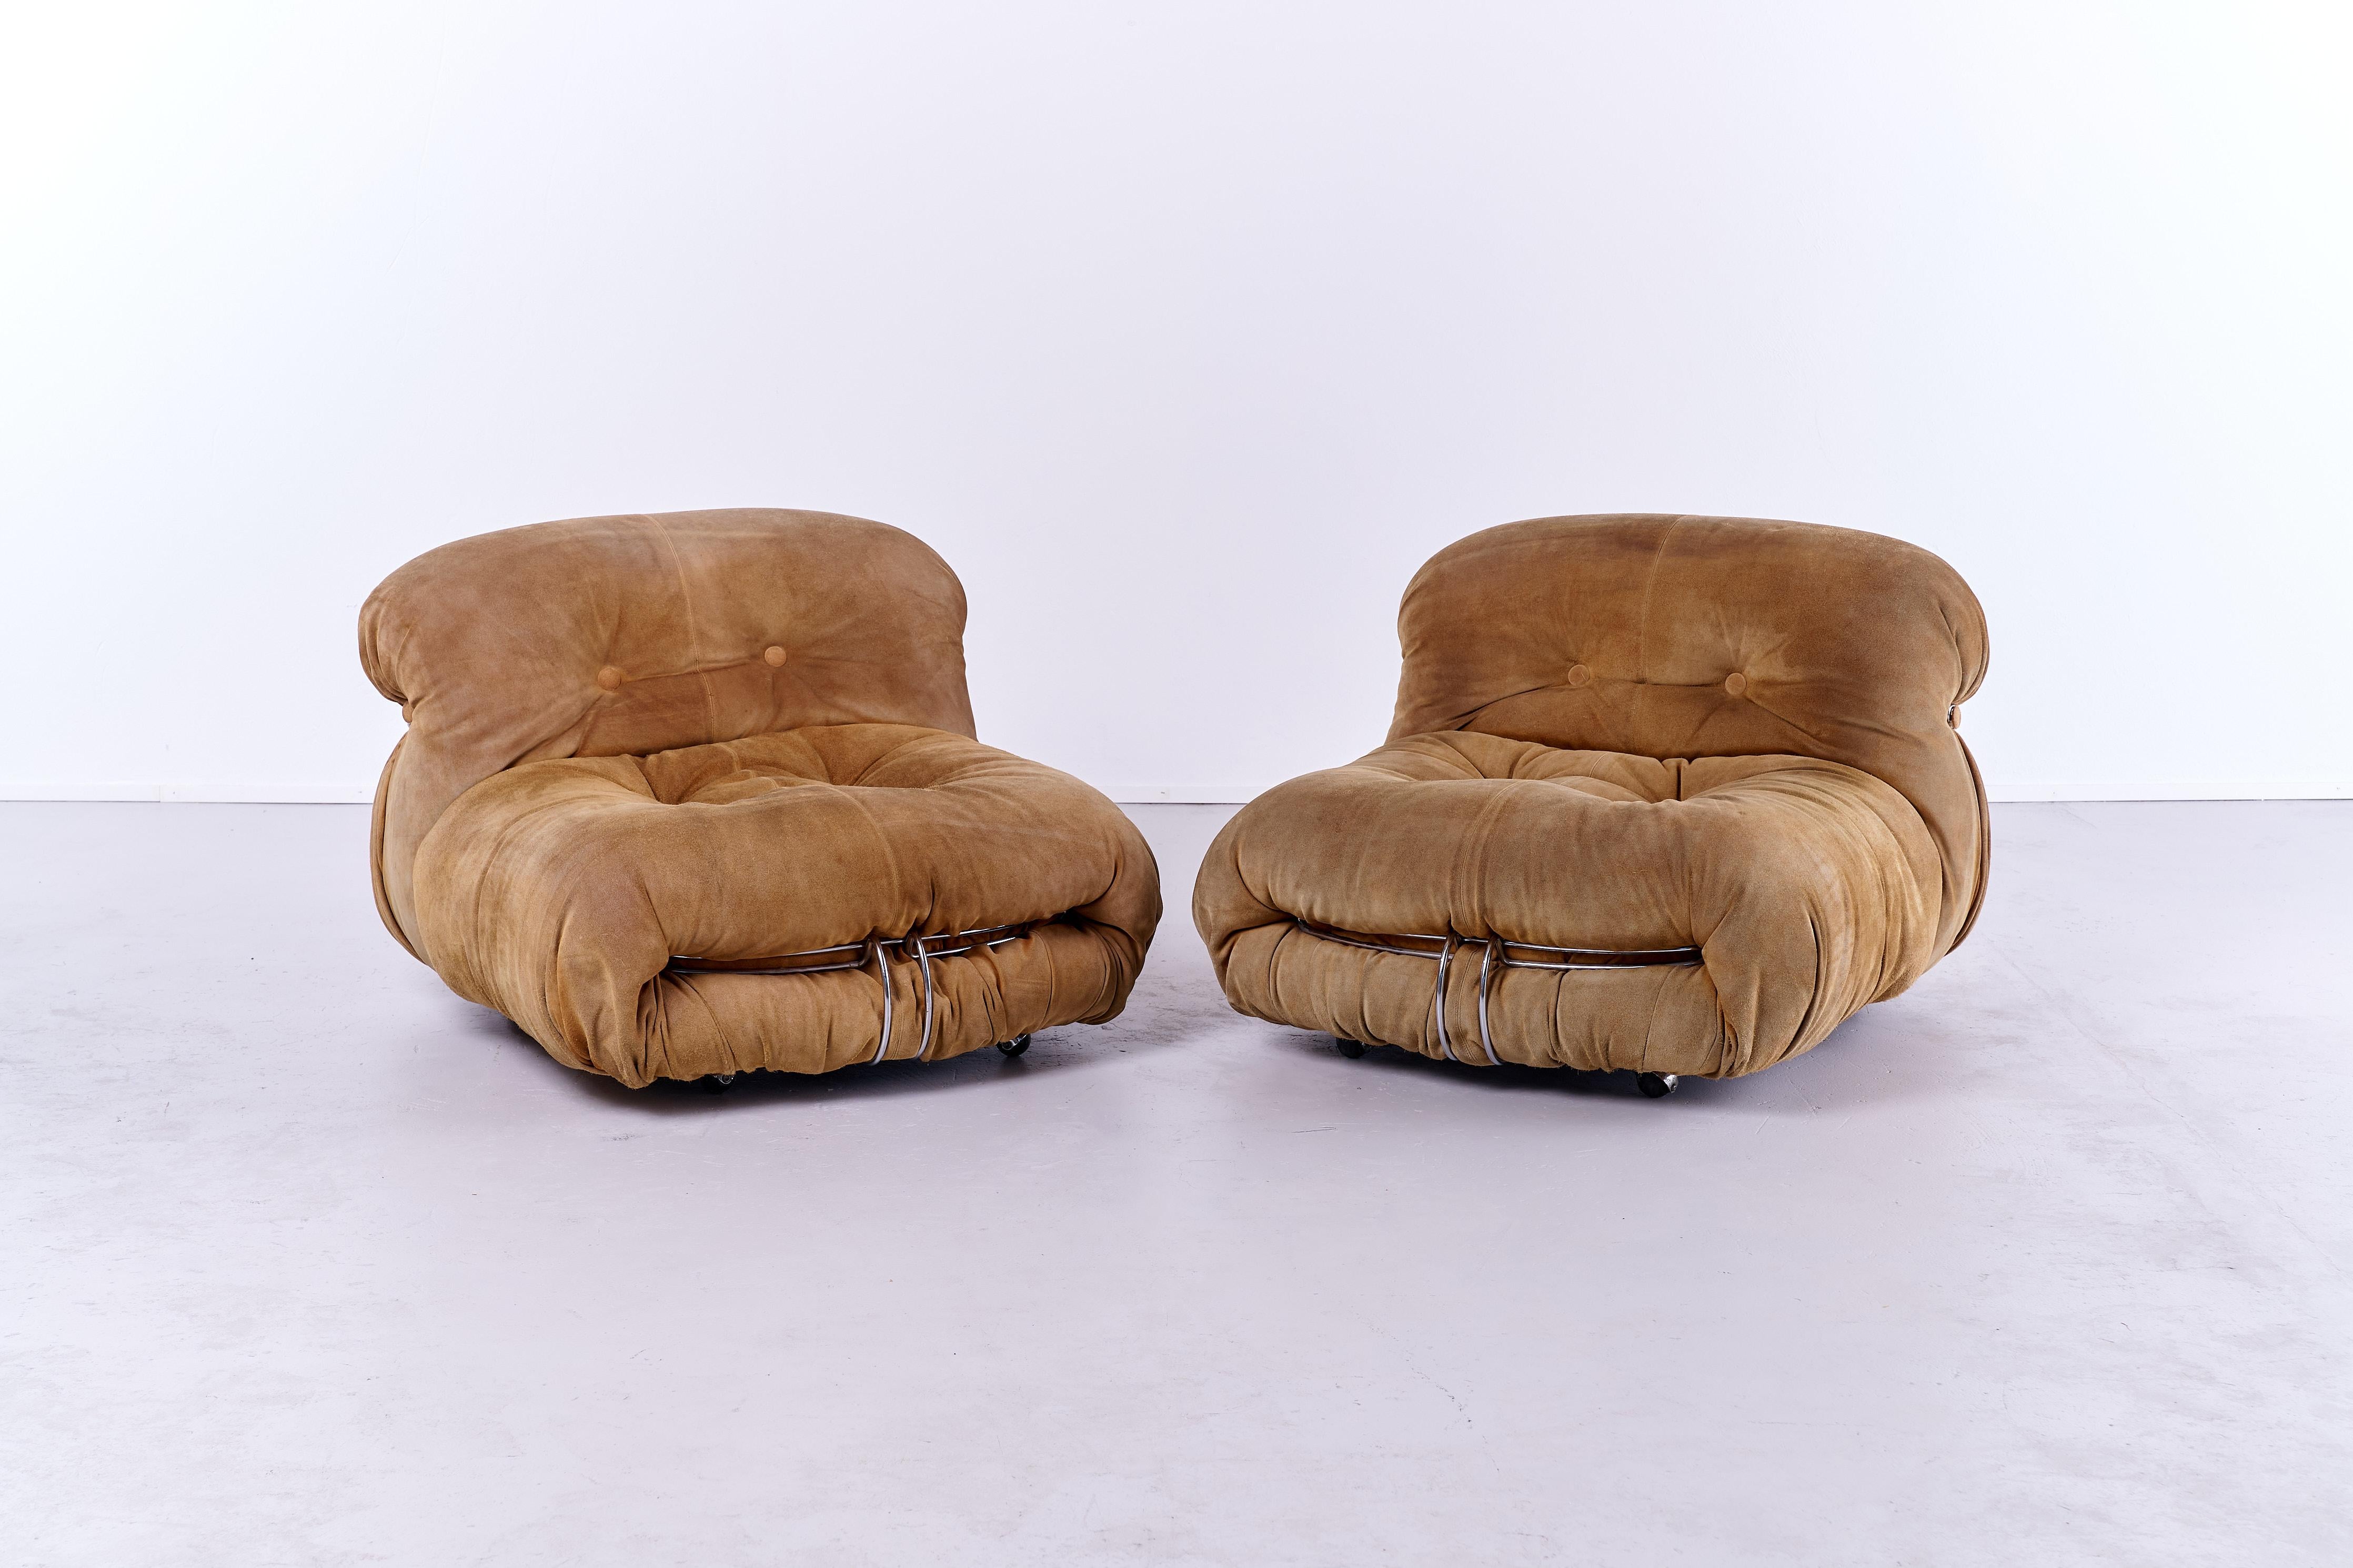 The Soriana Lounge Chair, a timeless creation by Italian designers Afra and Tobia Scarpa in 1969, is a masterpiece of furniture design. Its signature features include soft, inviting curves, a distinctive tufted design that adds an air of elegance